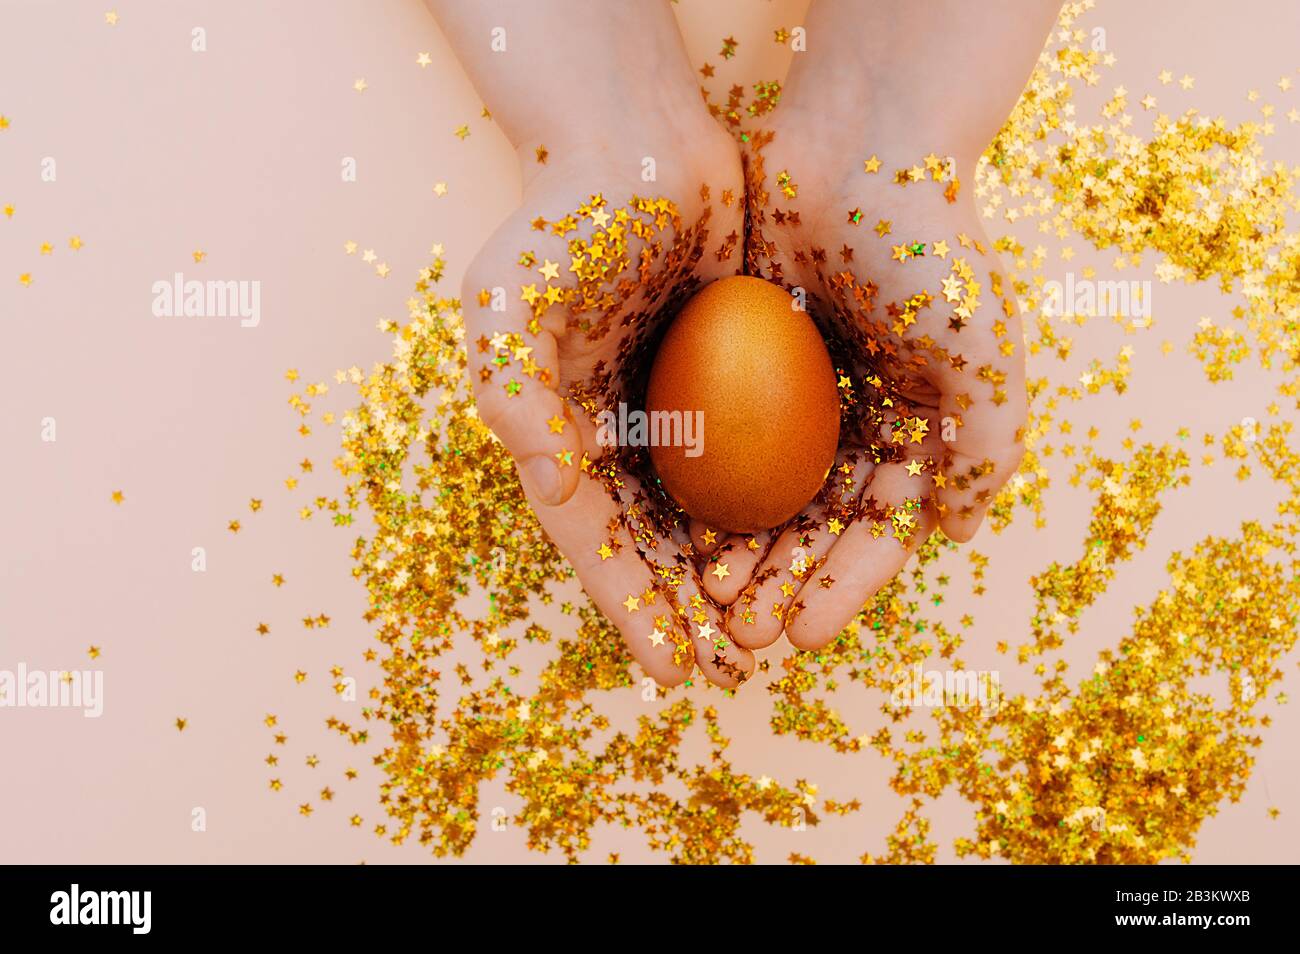 light skin hand in gold spangles in the form of stars firmly hold a Golden Easter egg on a pink background with sequins. Happy Easter flat lay mockup Stock Photo